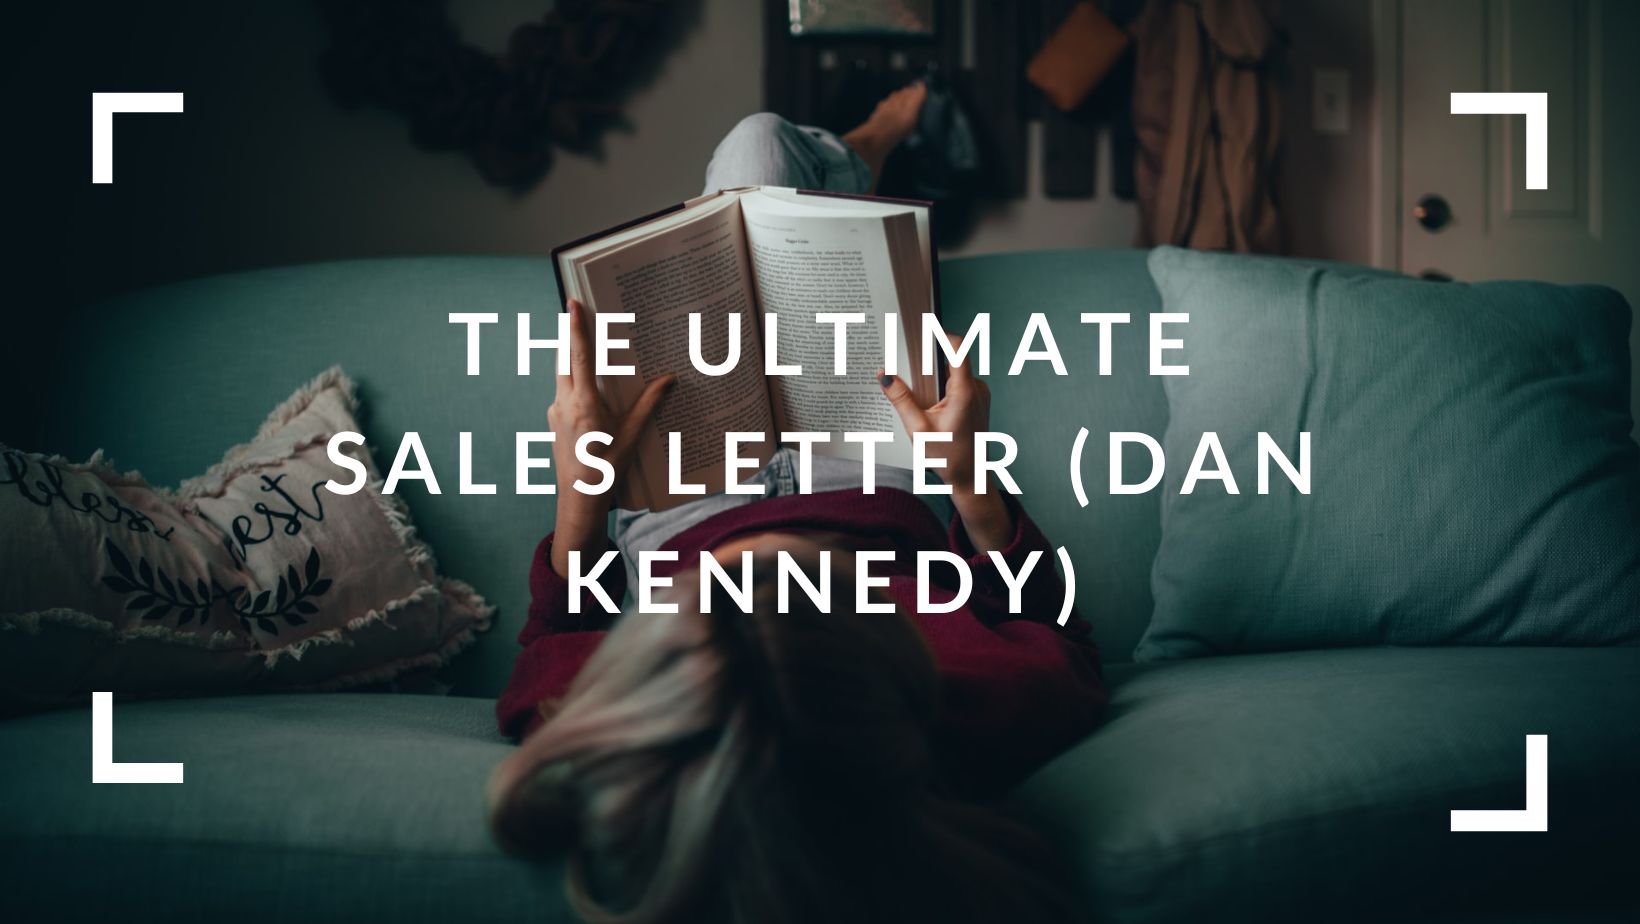 The Ultimate Sales Letter (Dan Kennedy)